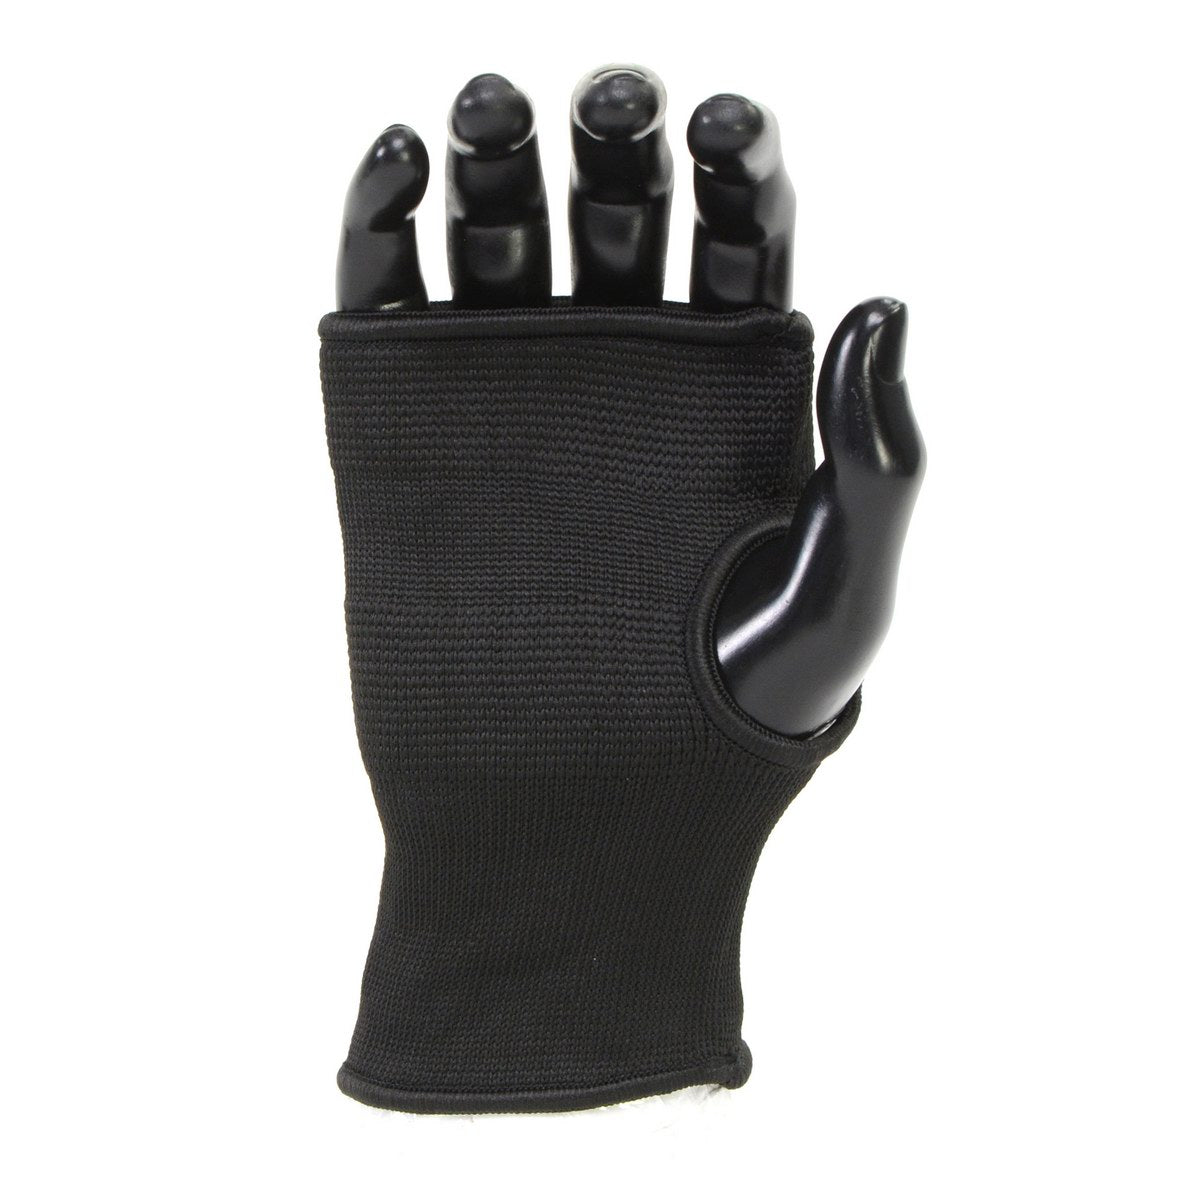 X-Fitness XF3002 Wrist Support Sleeves-BLACK